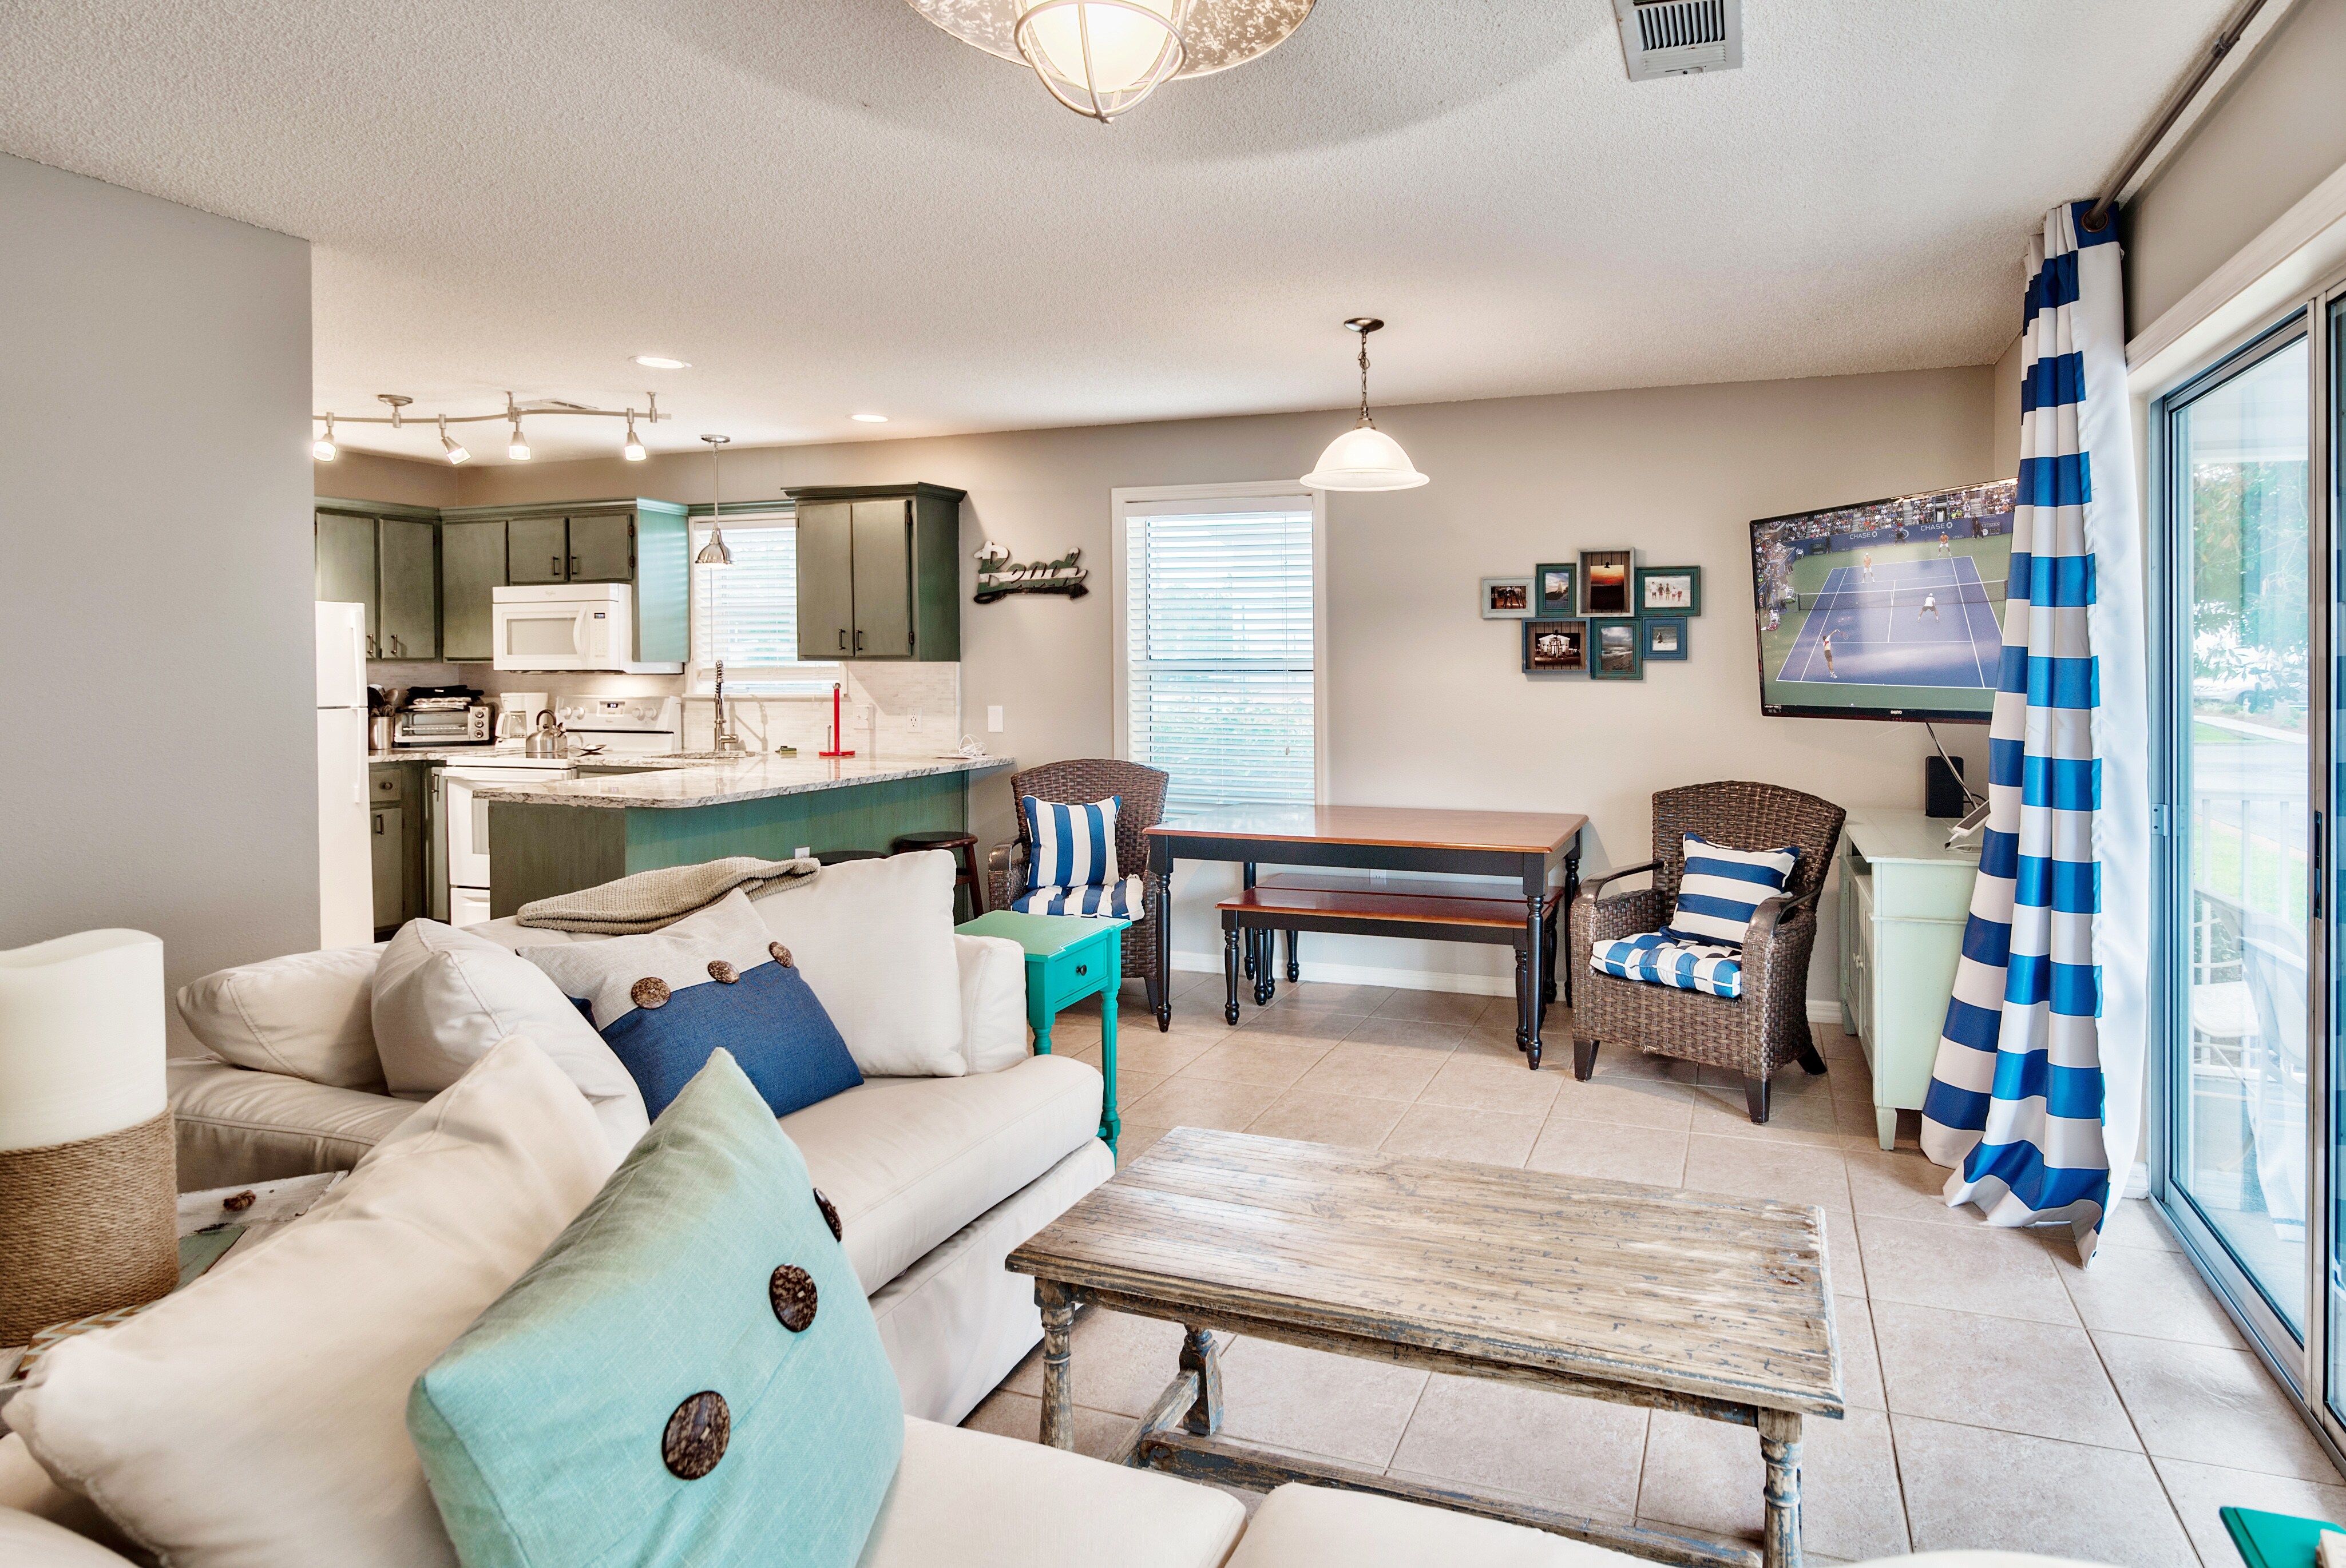 Welcome to Santa Rosa Beach! This condo is professionally managed by TurnKey Vacation Rentals.